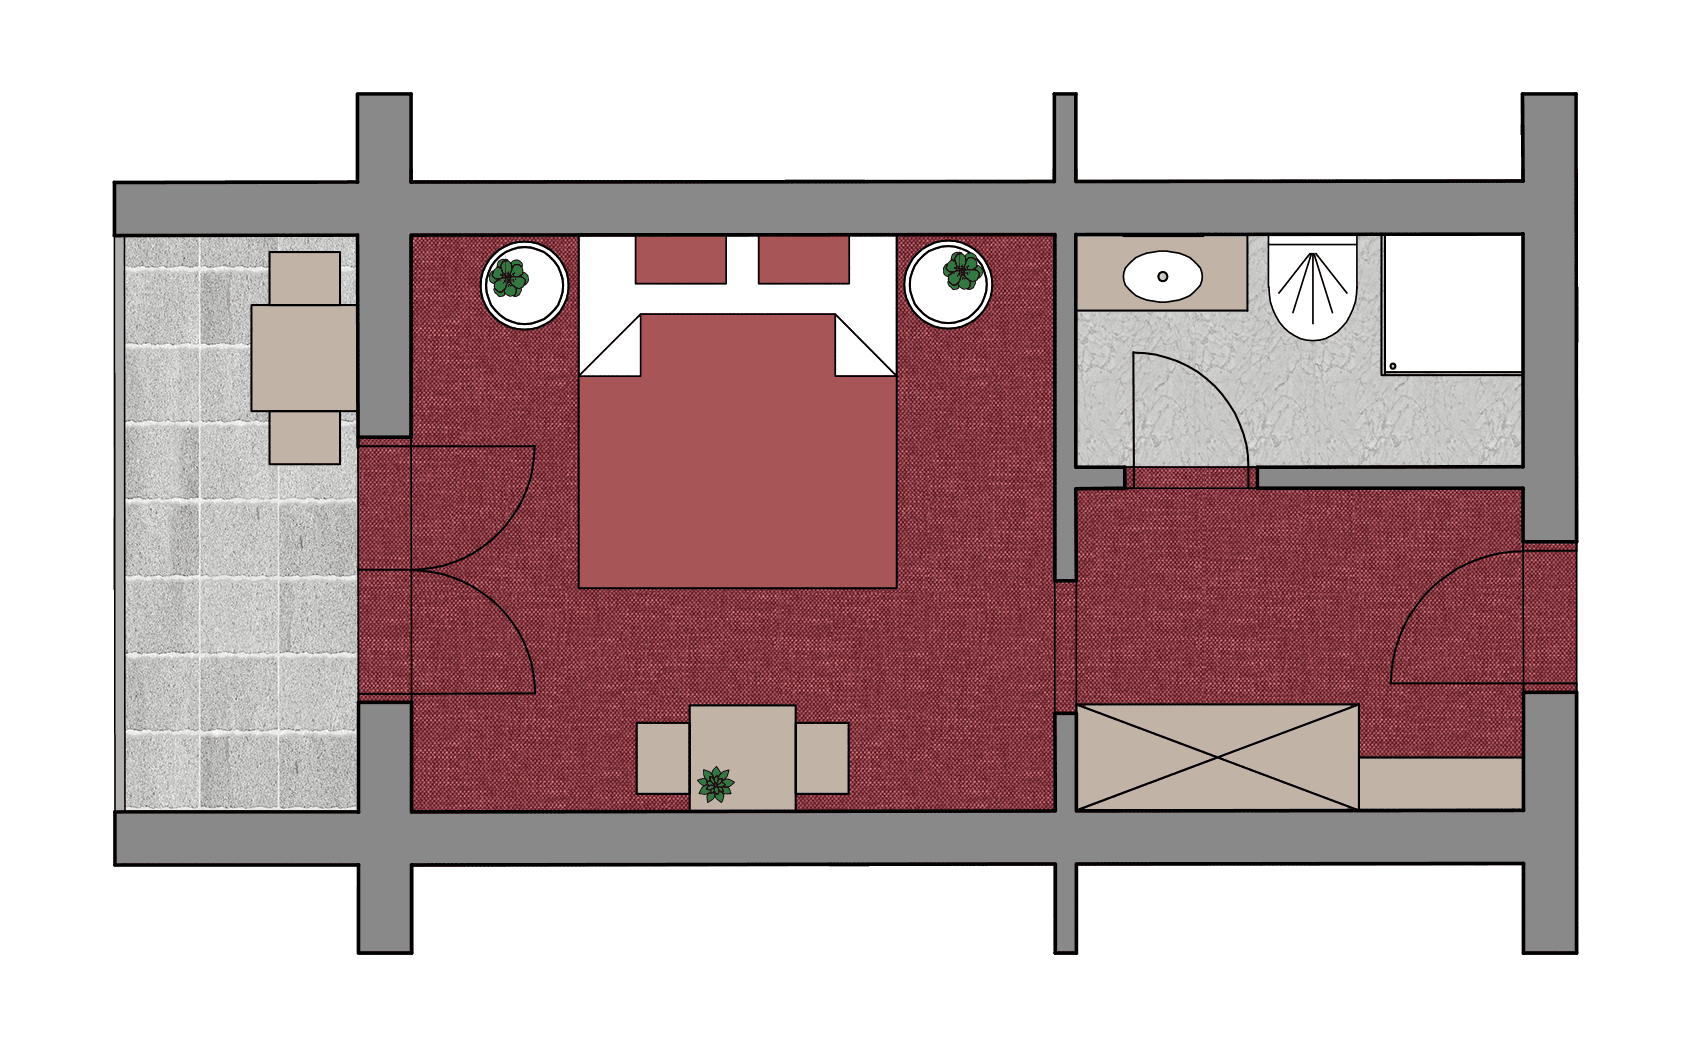 Ground plan of the room